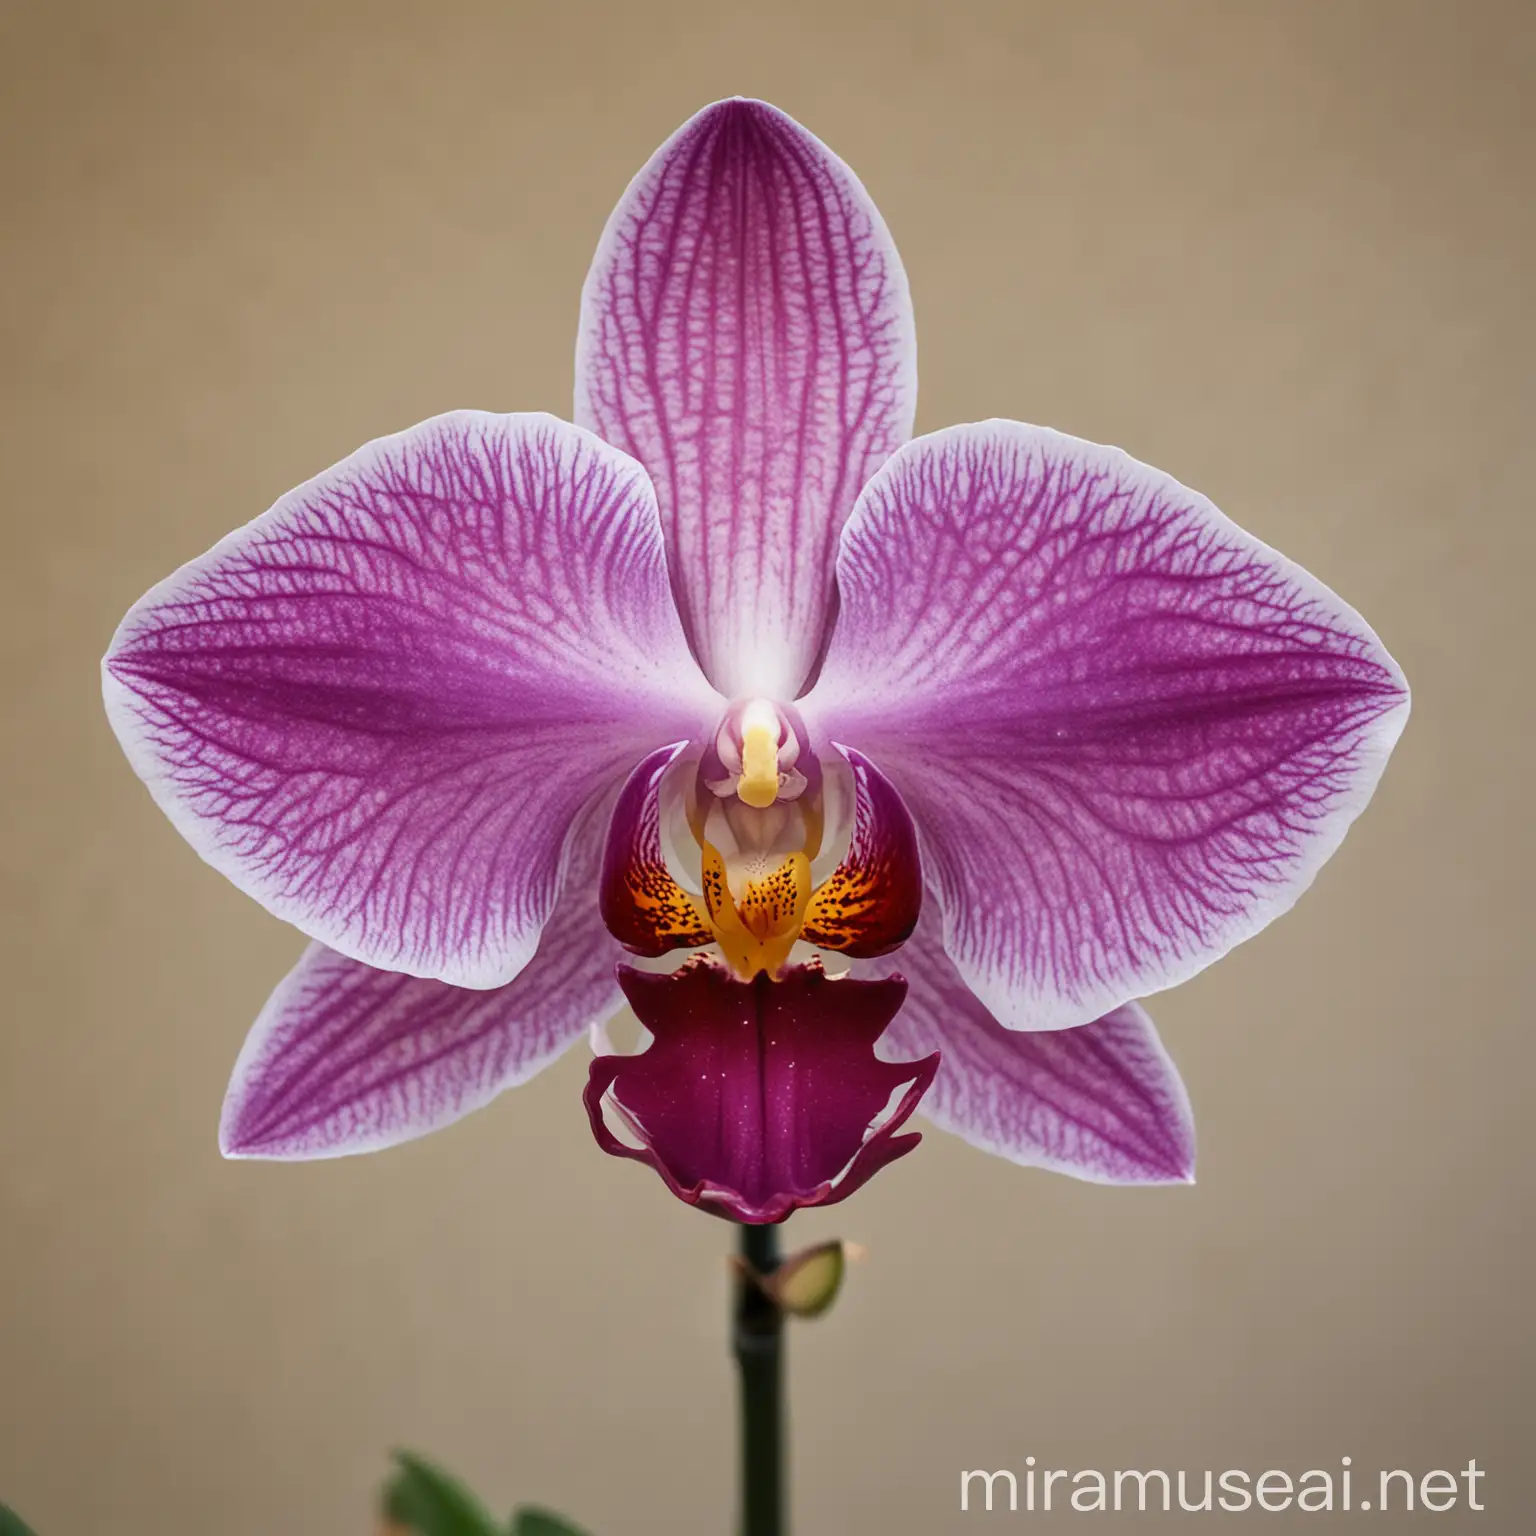 Vibrant Single Orchid in Full Bloom Exquisite Floral Photography